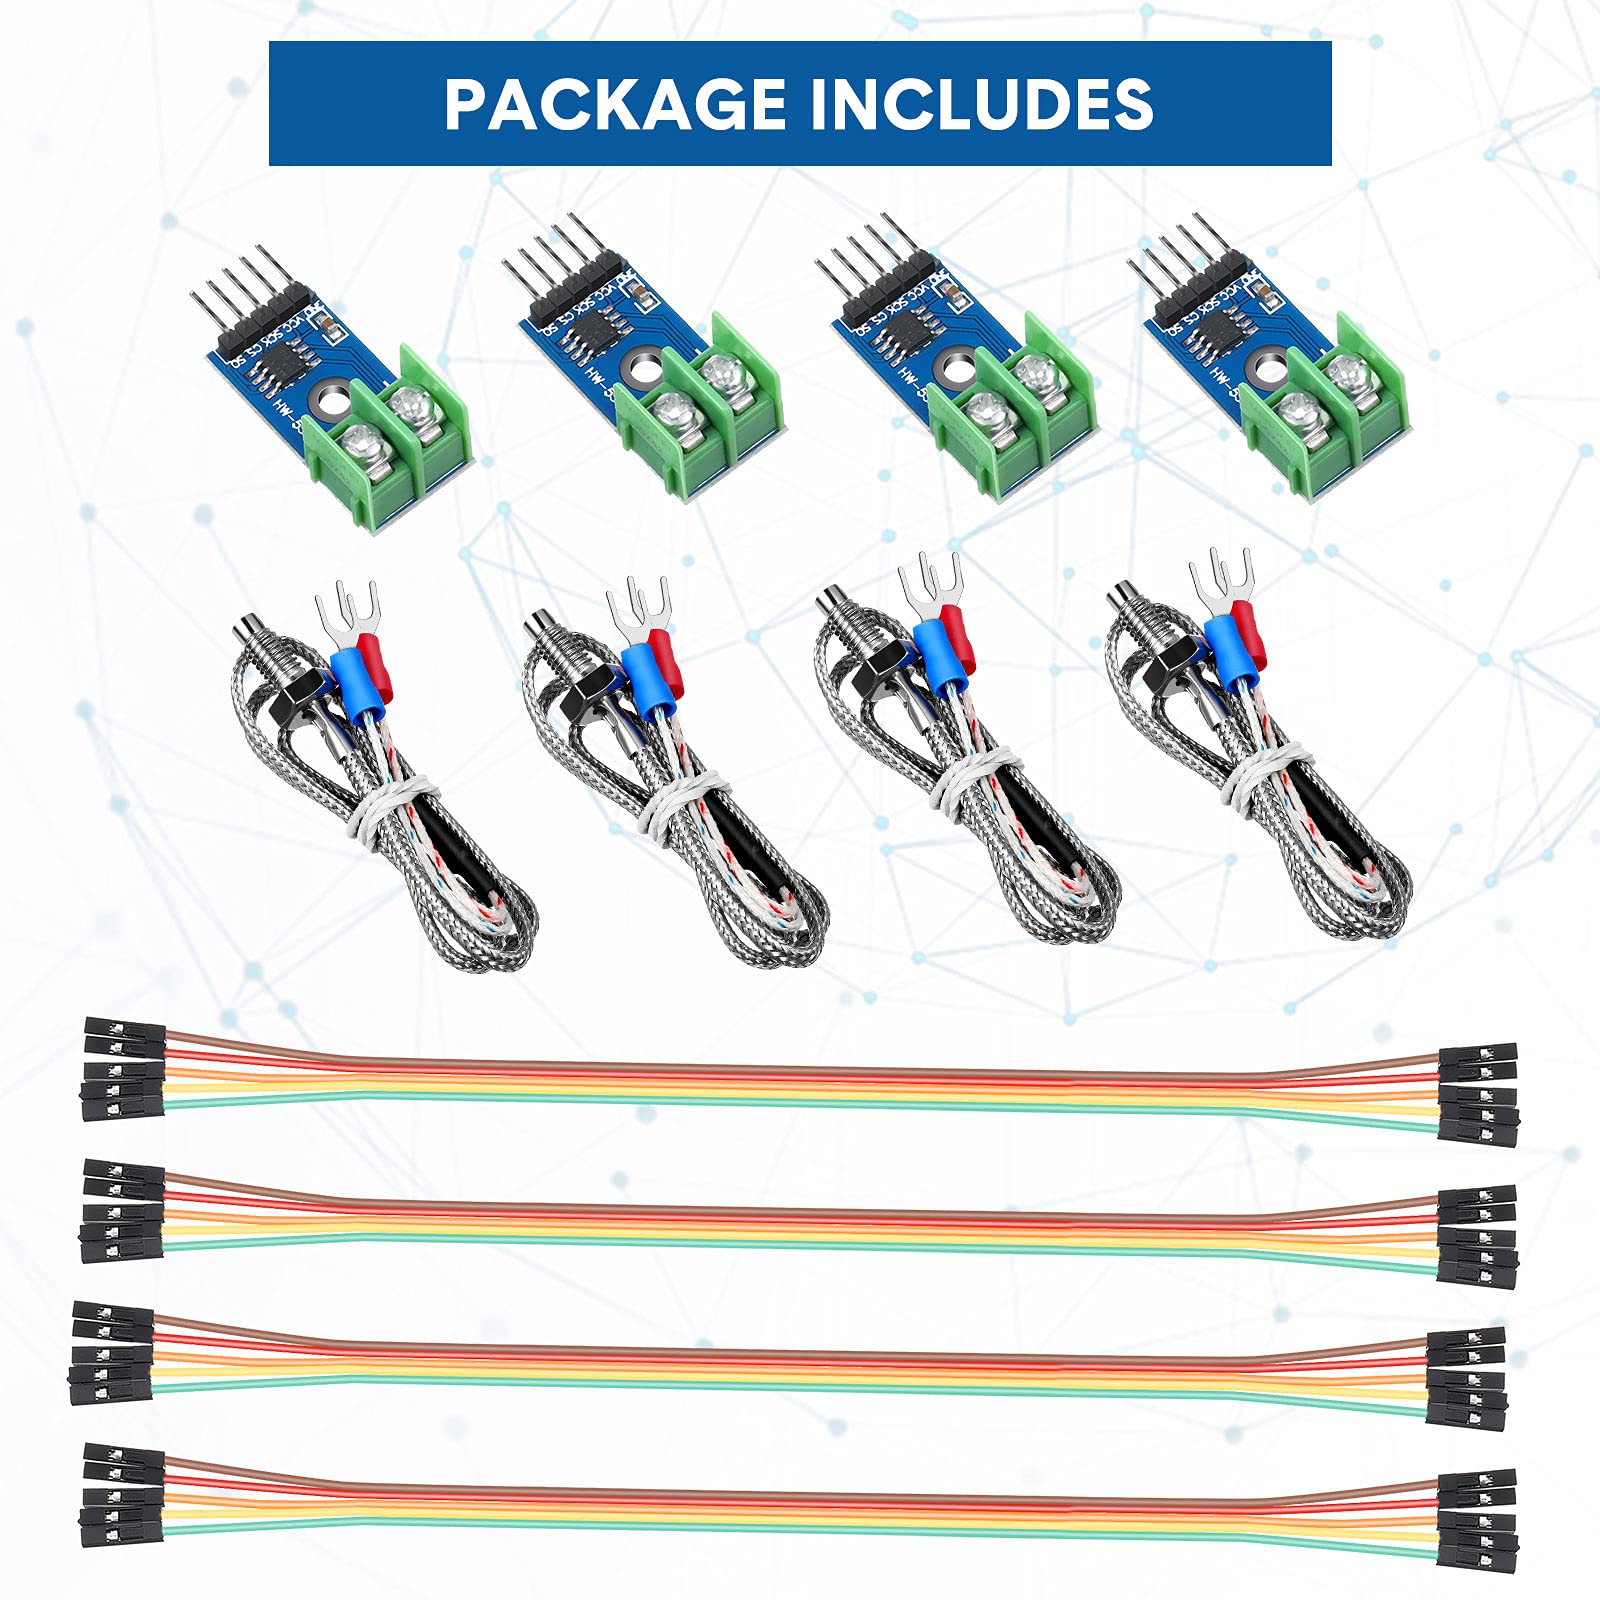 Weewooday 4 Sets Direct Current 3-5v Max6675 Themocouple Module and K Type Thermocouple Temperature Sensor Thermocouple Sensor Set M6 Screw with Cable Cord Compatible with Arduino/Raspberry Pi